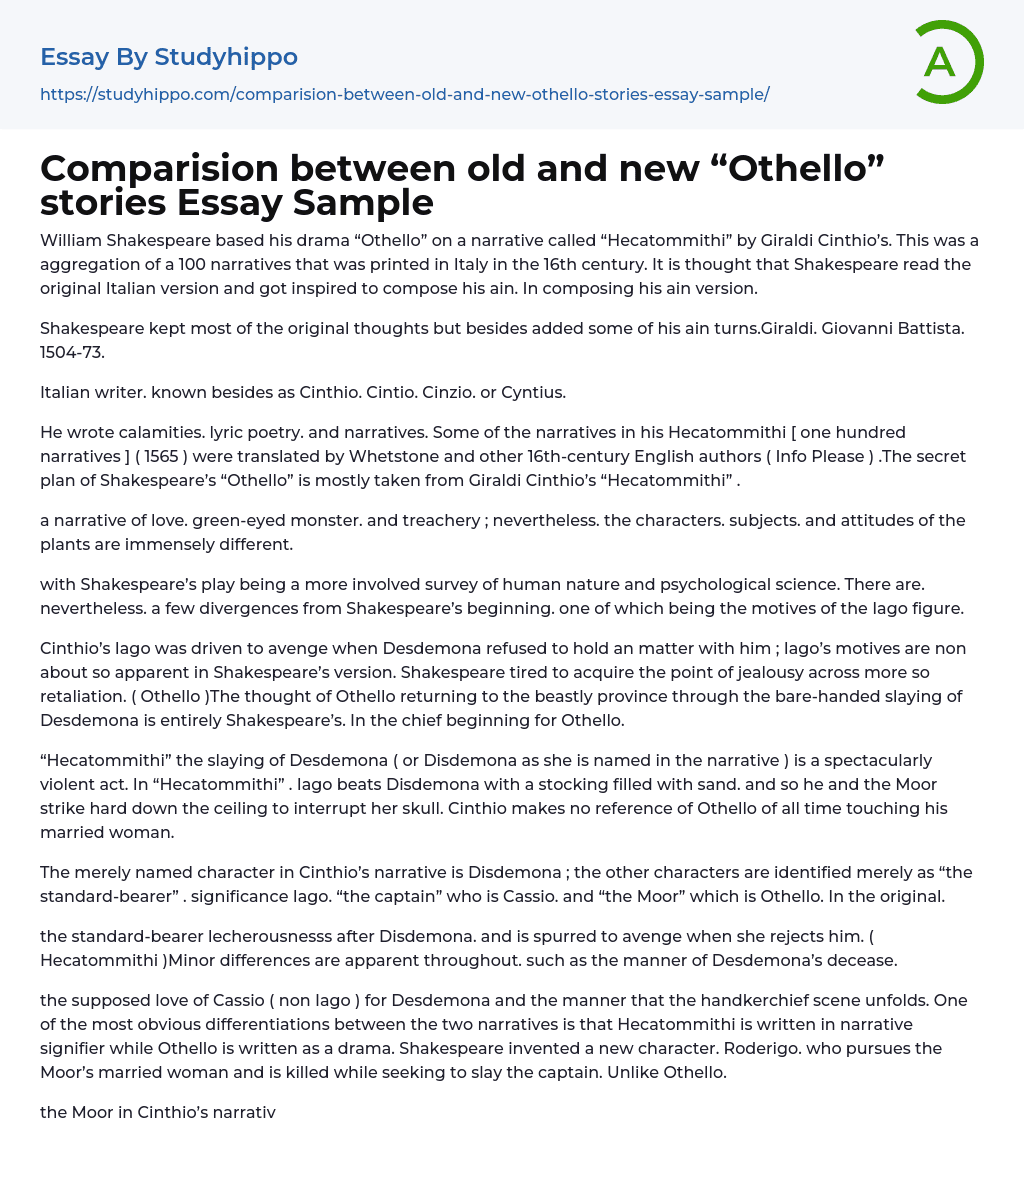 Comparision between old and new “Othello” stories Essay Sample